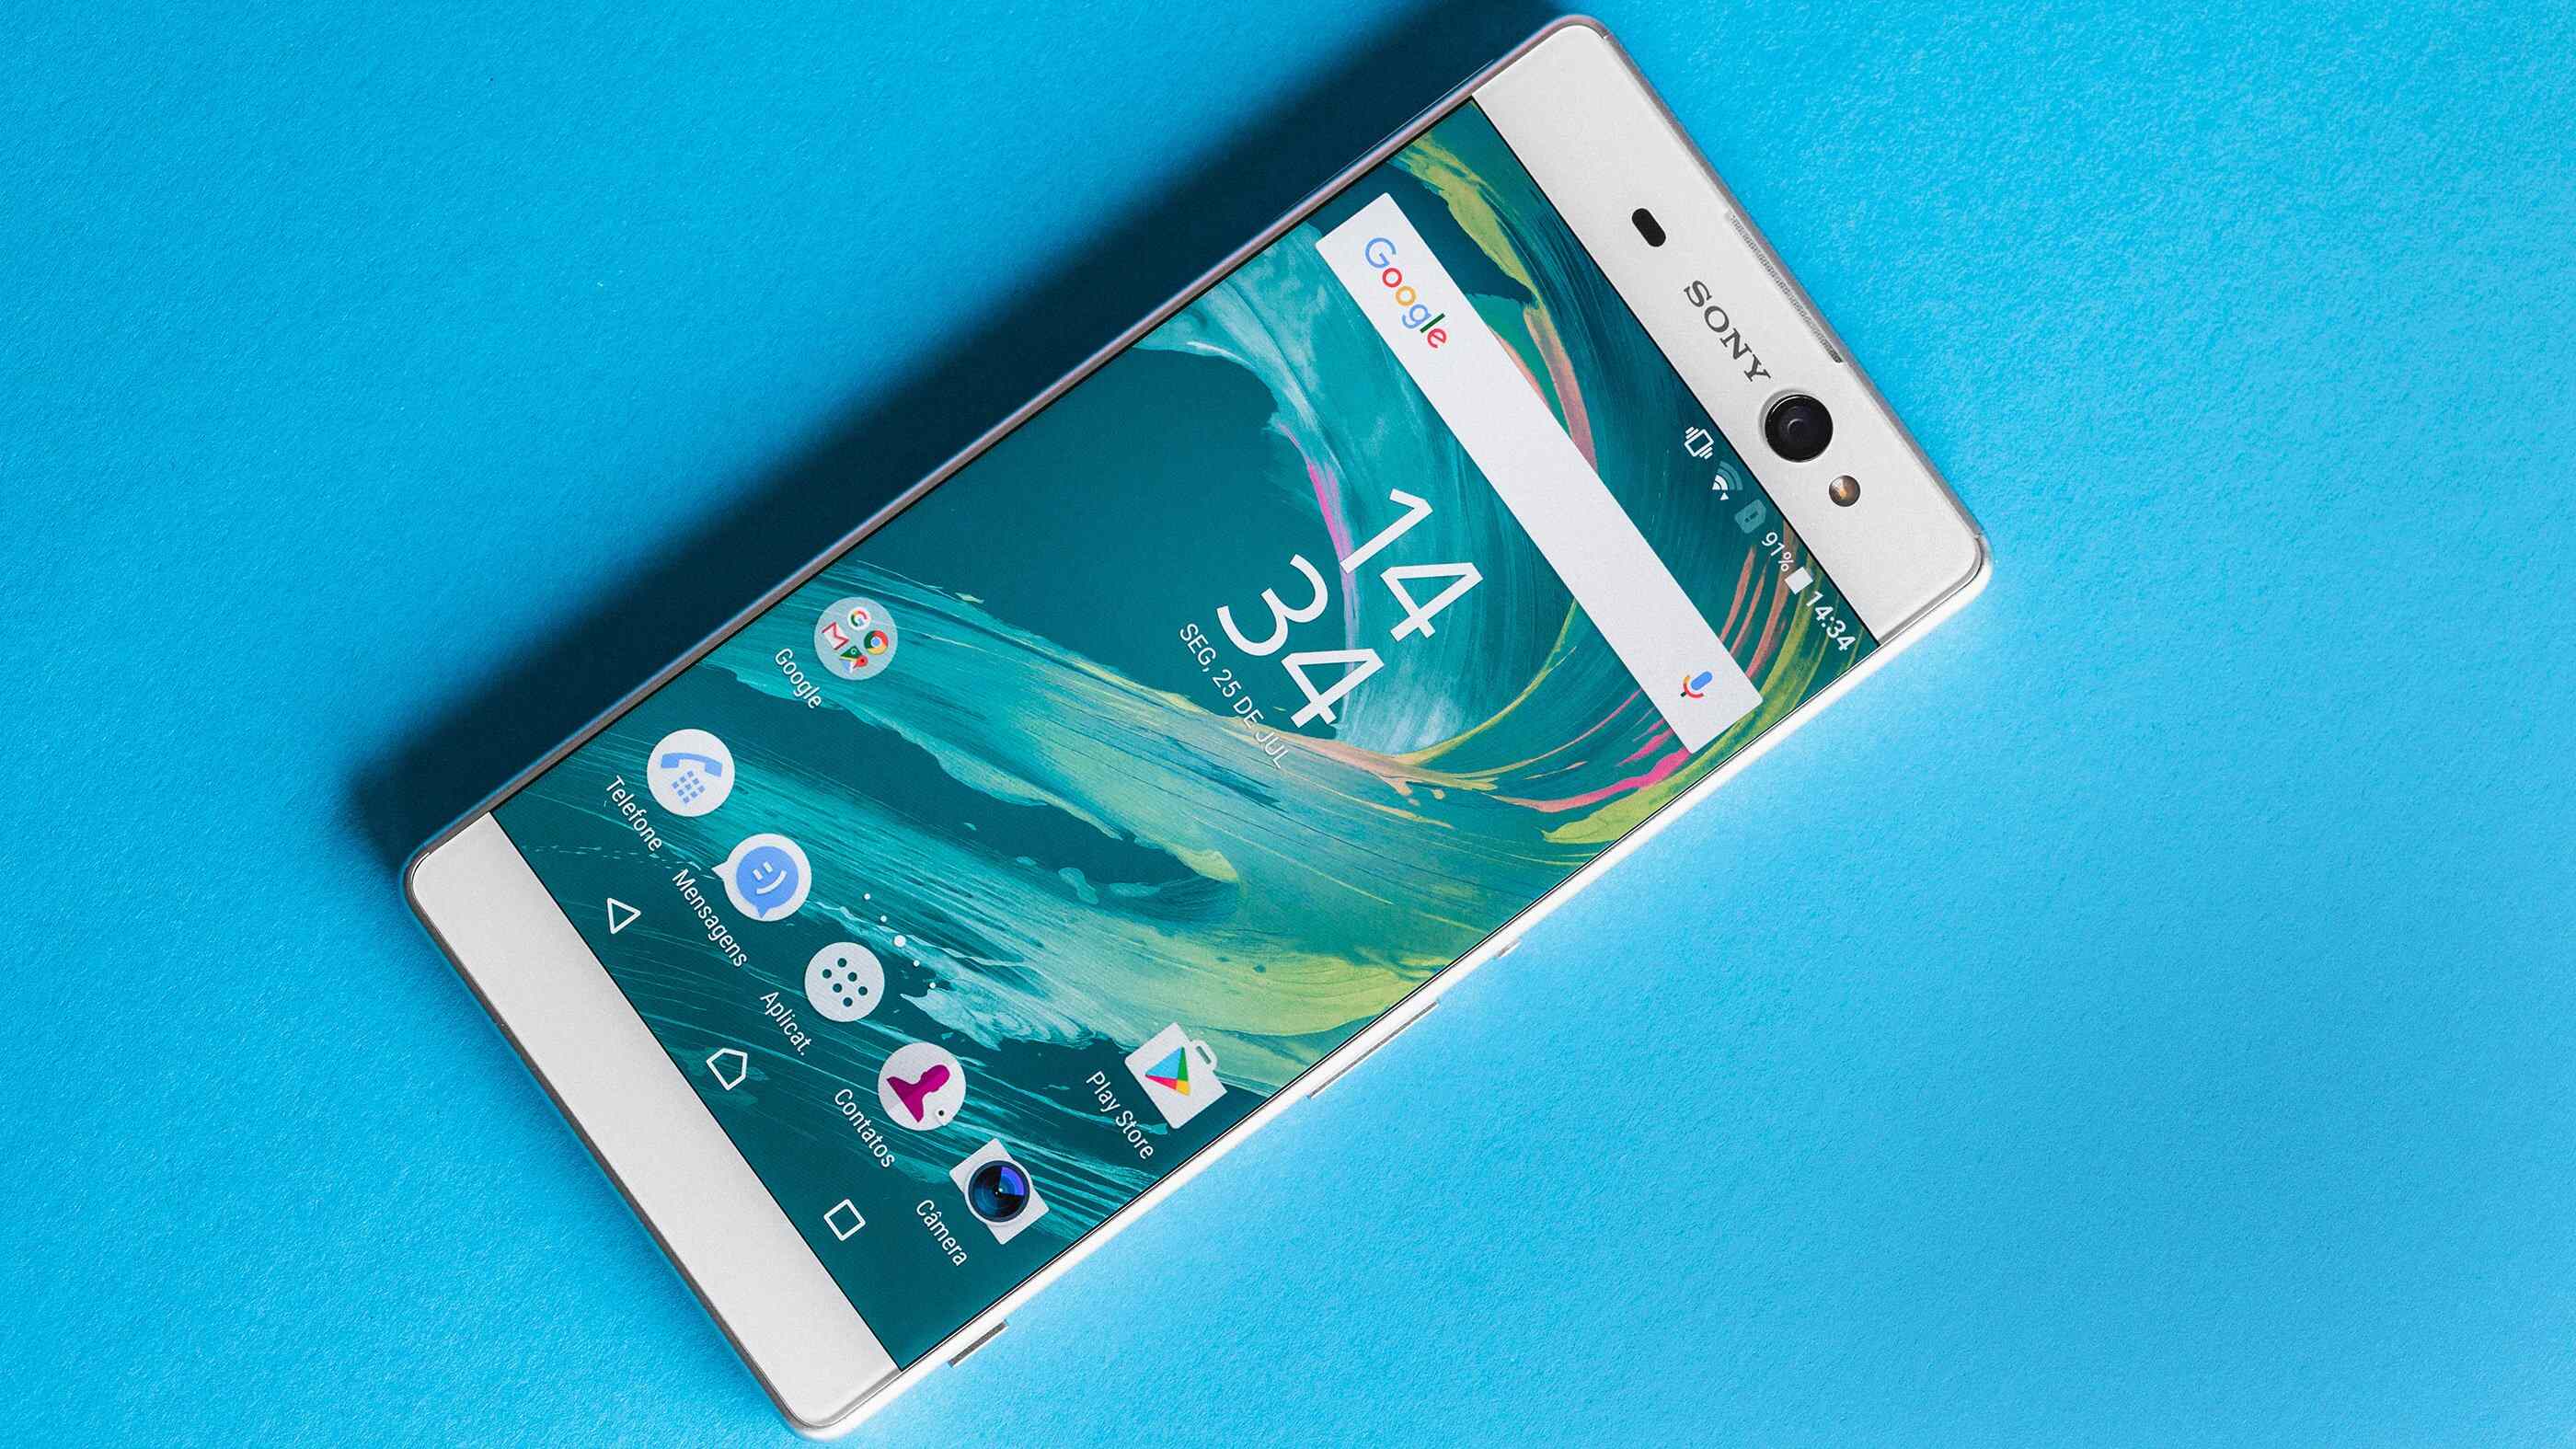 sony-xperia-xa-ultra-specifications-release-date-price